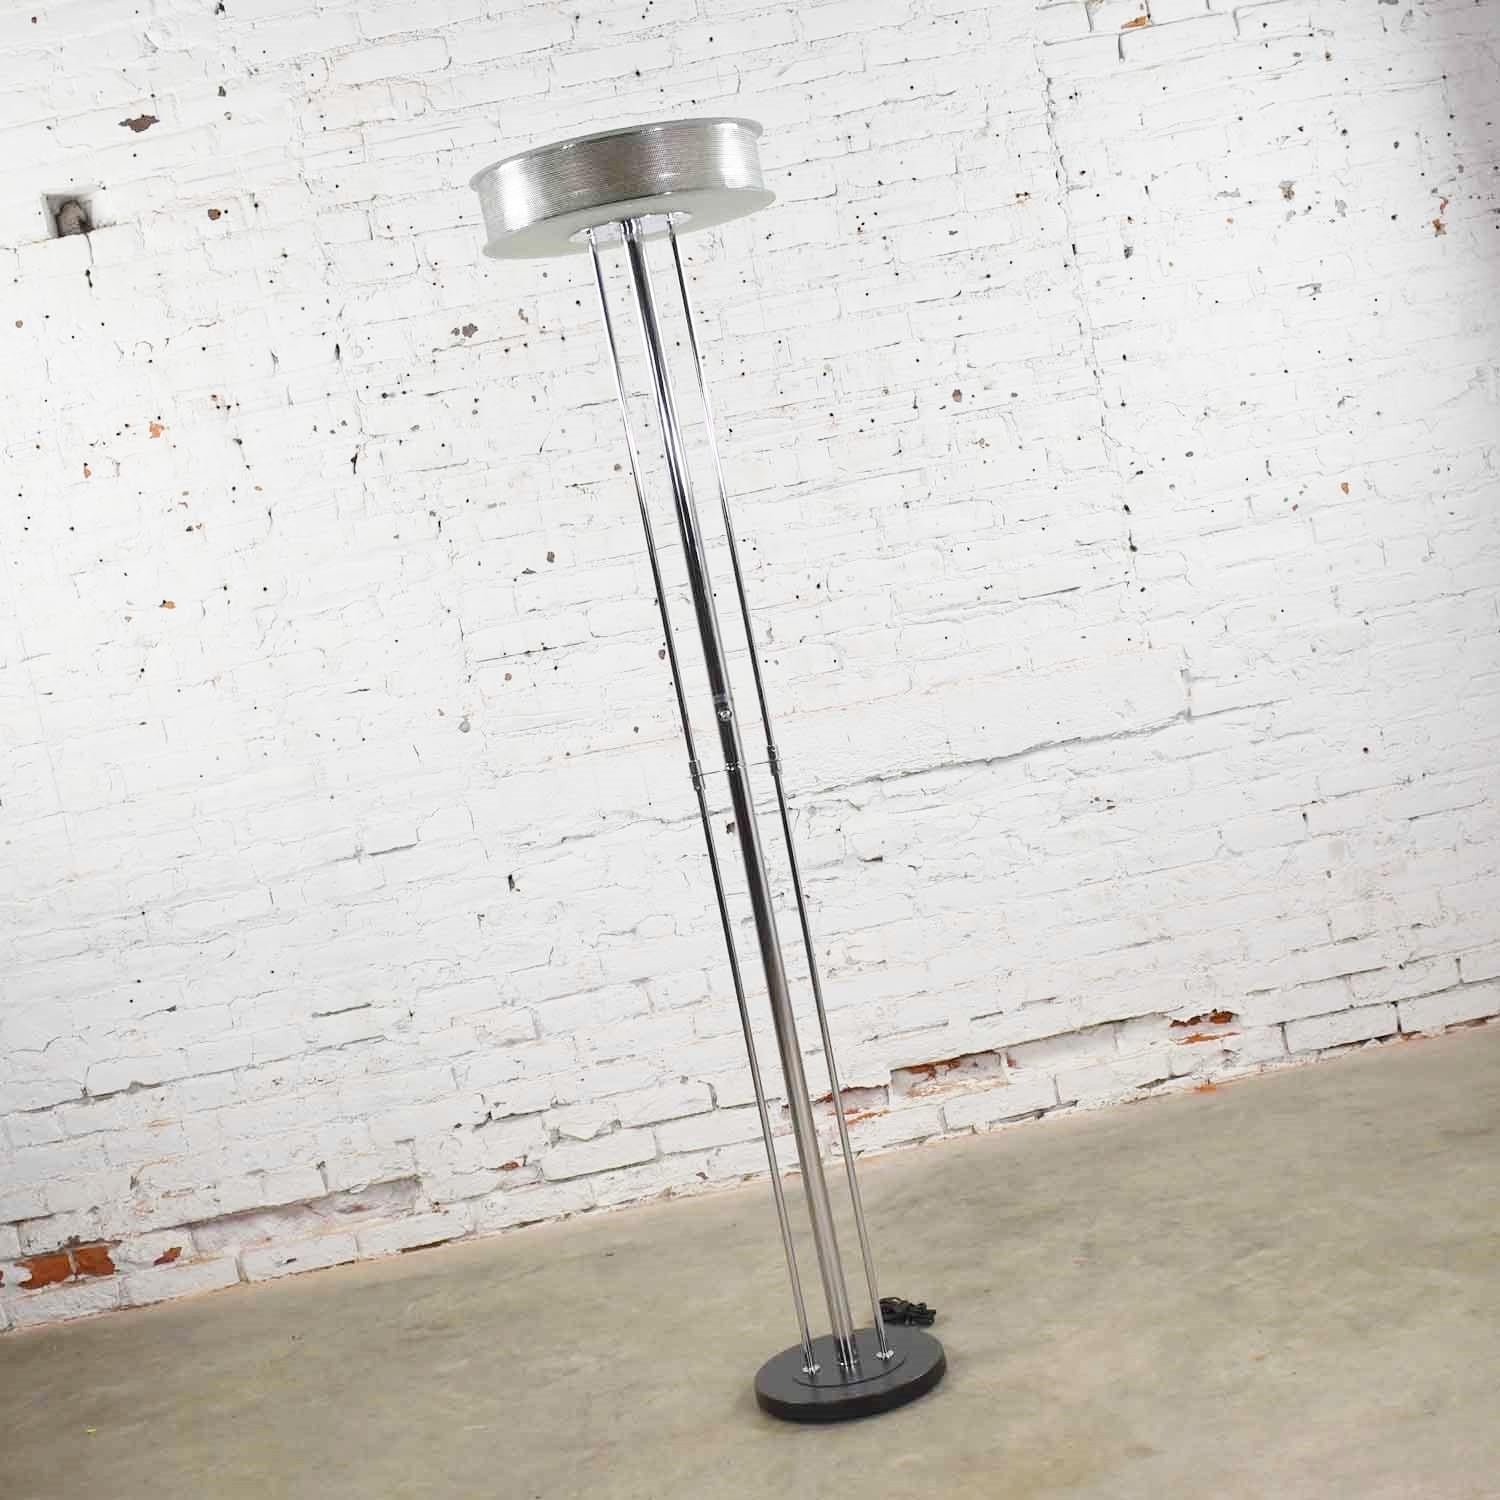 Handsome modern chrome floor lamp with a triple shaft and round perforated ring and glass disc shade. It is in wonderful vintage condition. The chrome on the shafts and upper portions of the lamp are in fabulous shape as are the metal and glass.